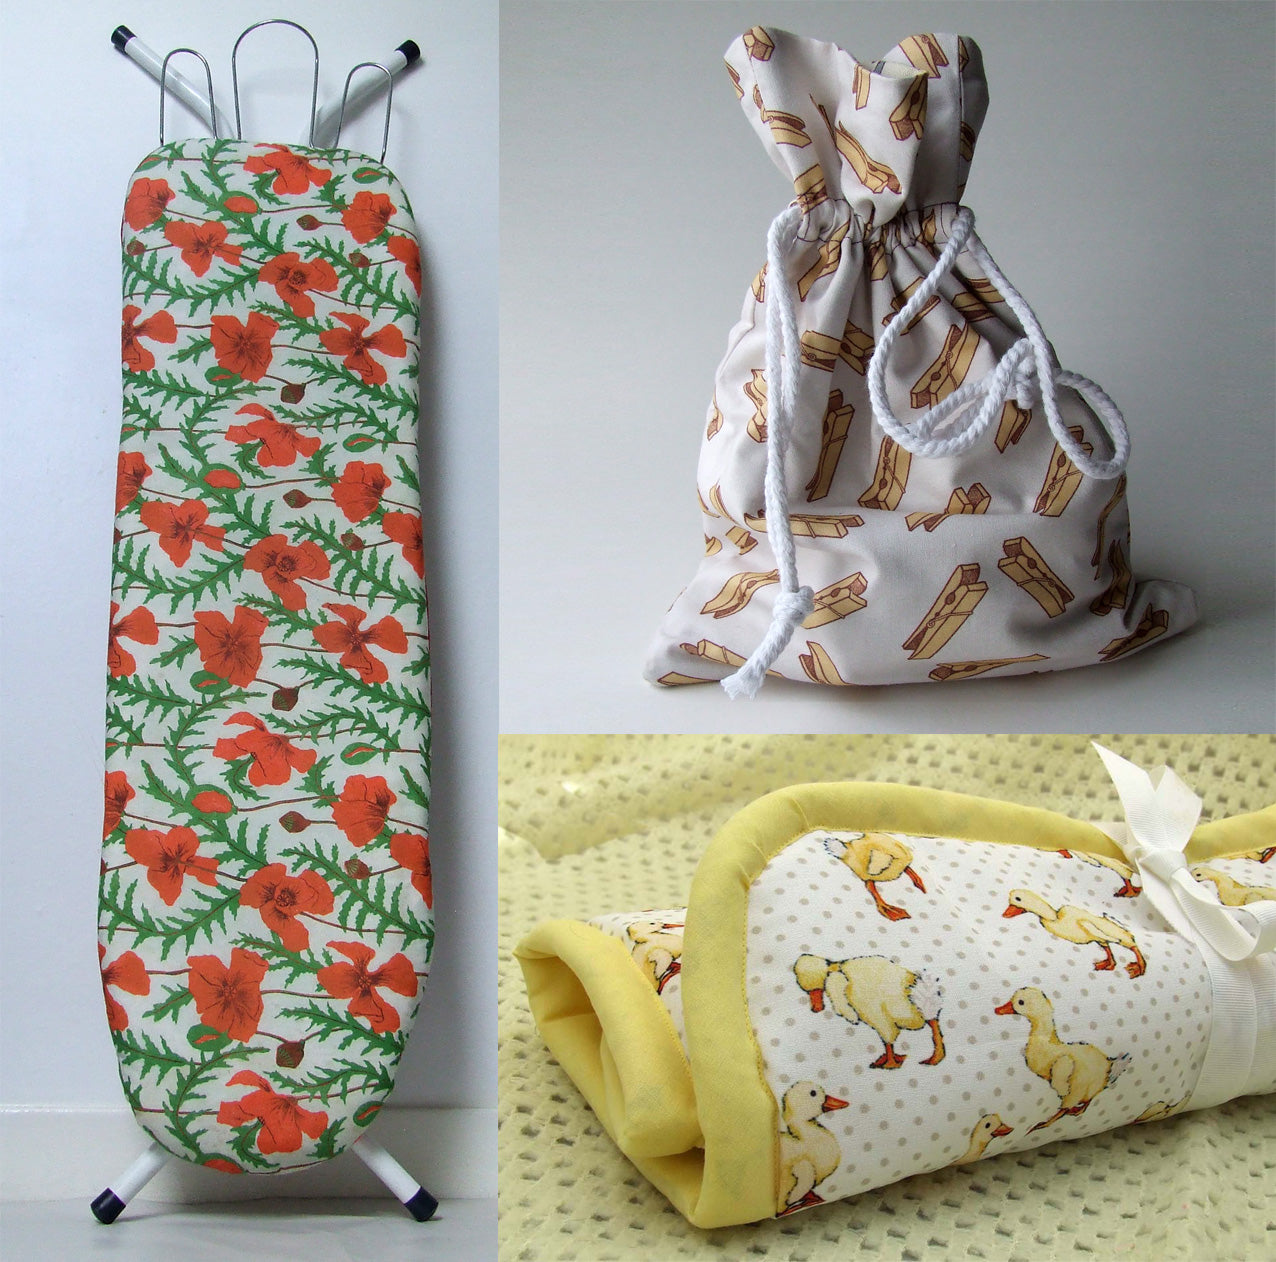 Utility items made out of Three Bears Prints fabric